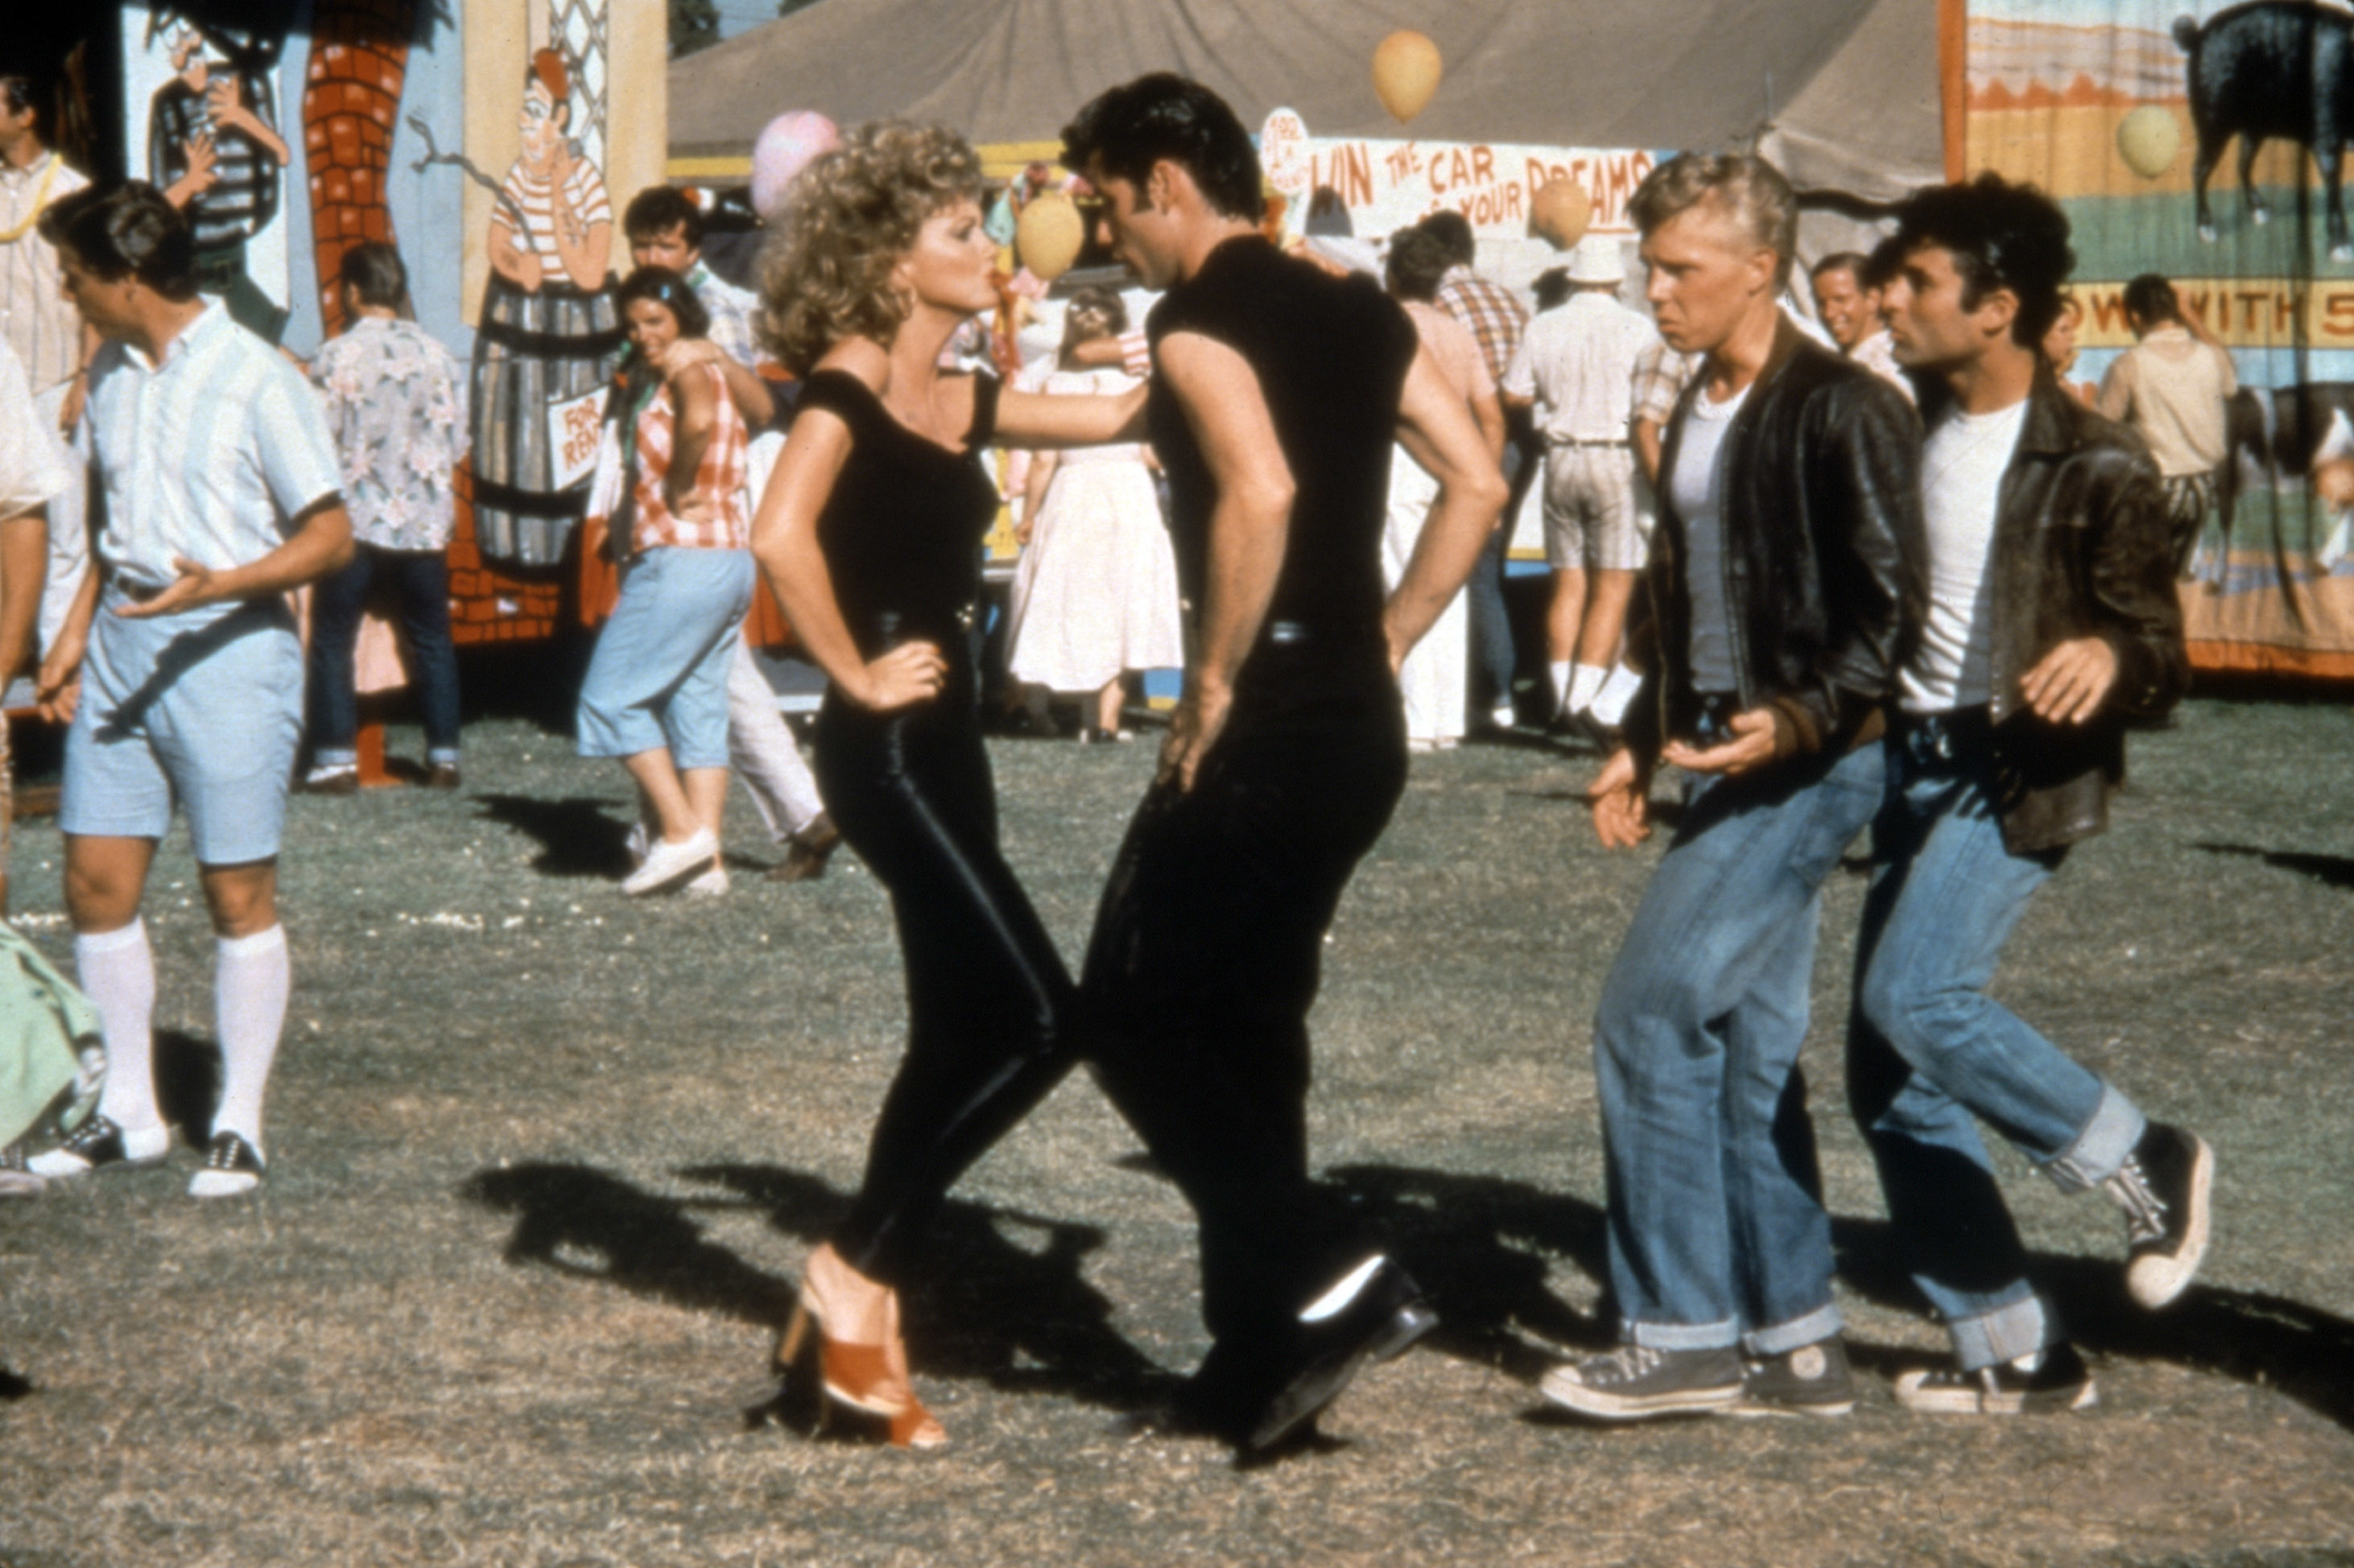 Danny and Sandy from Grease in a dance pose at the carnival